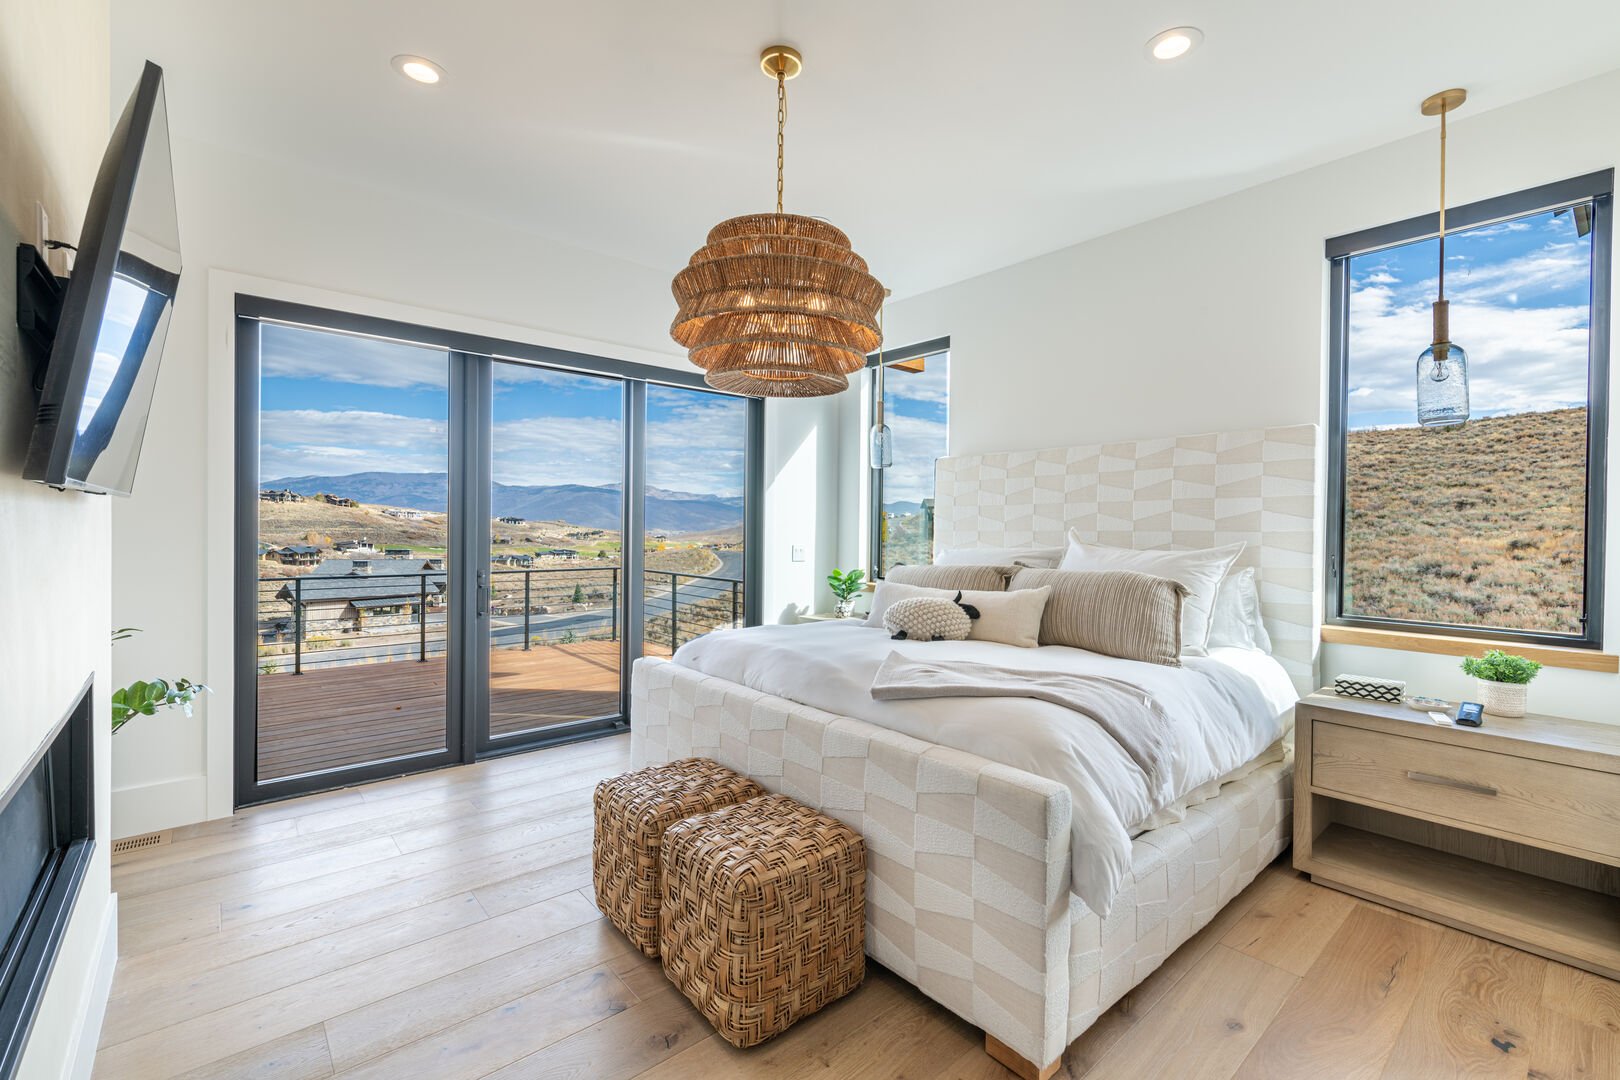 Master bedroom with stunning views.